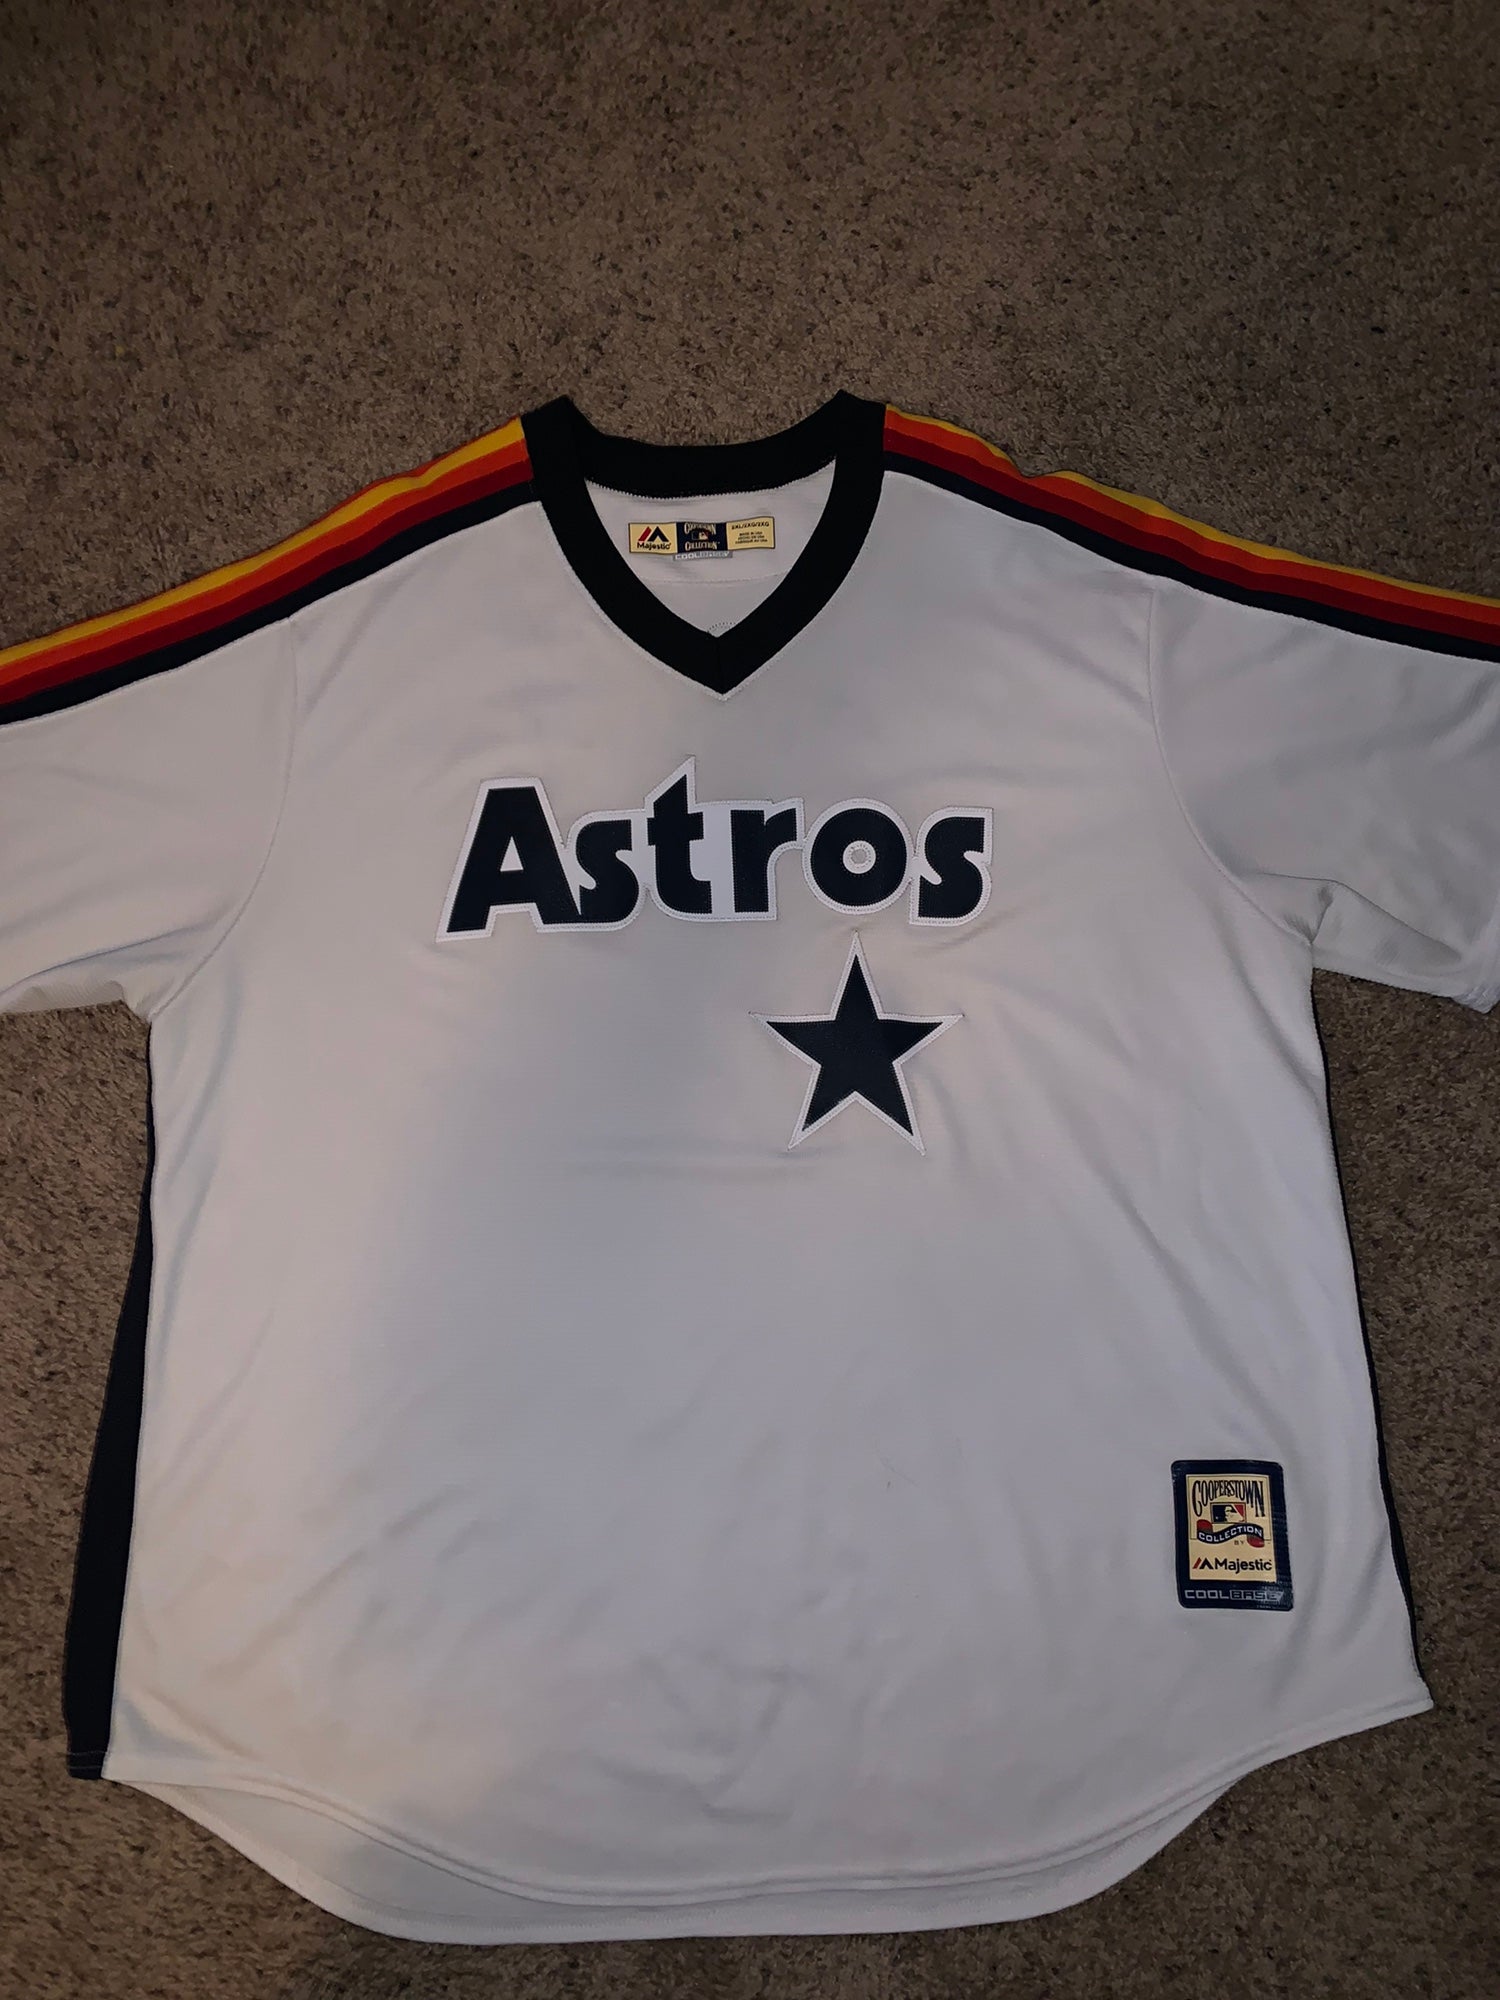 Men's Carlos Lee Houston Astros Replica White Home Cooperstown